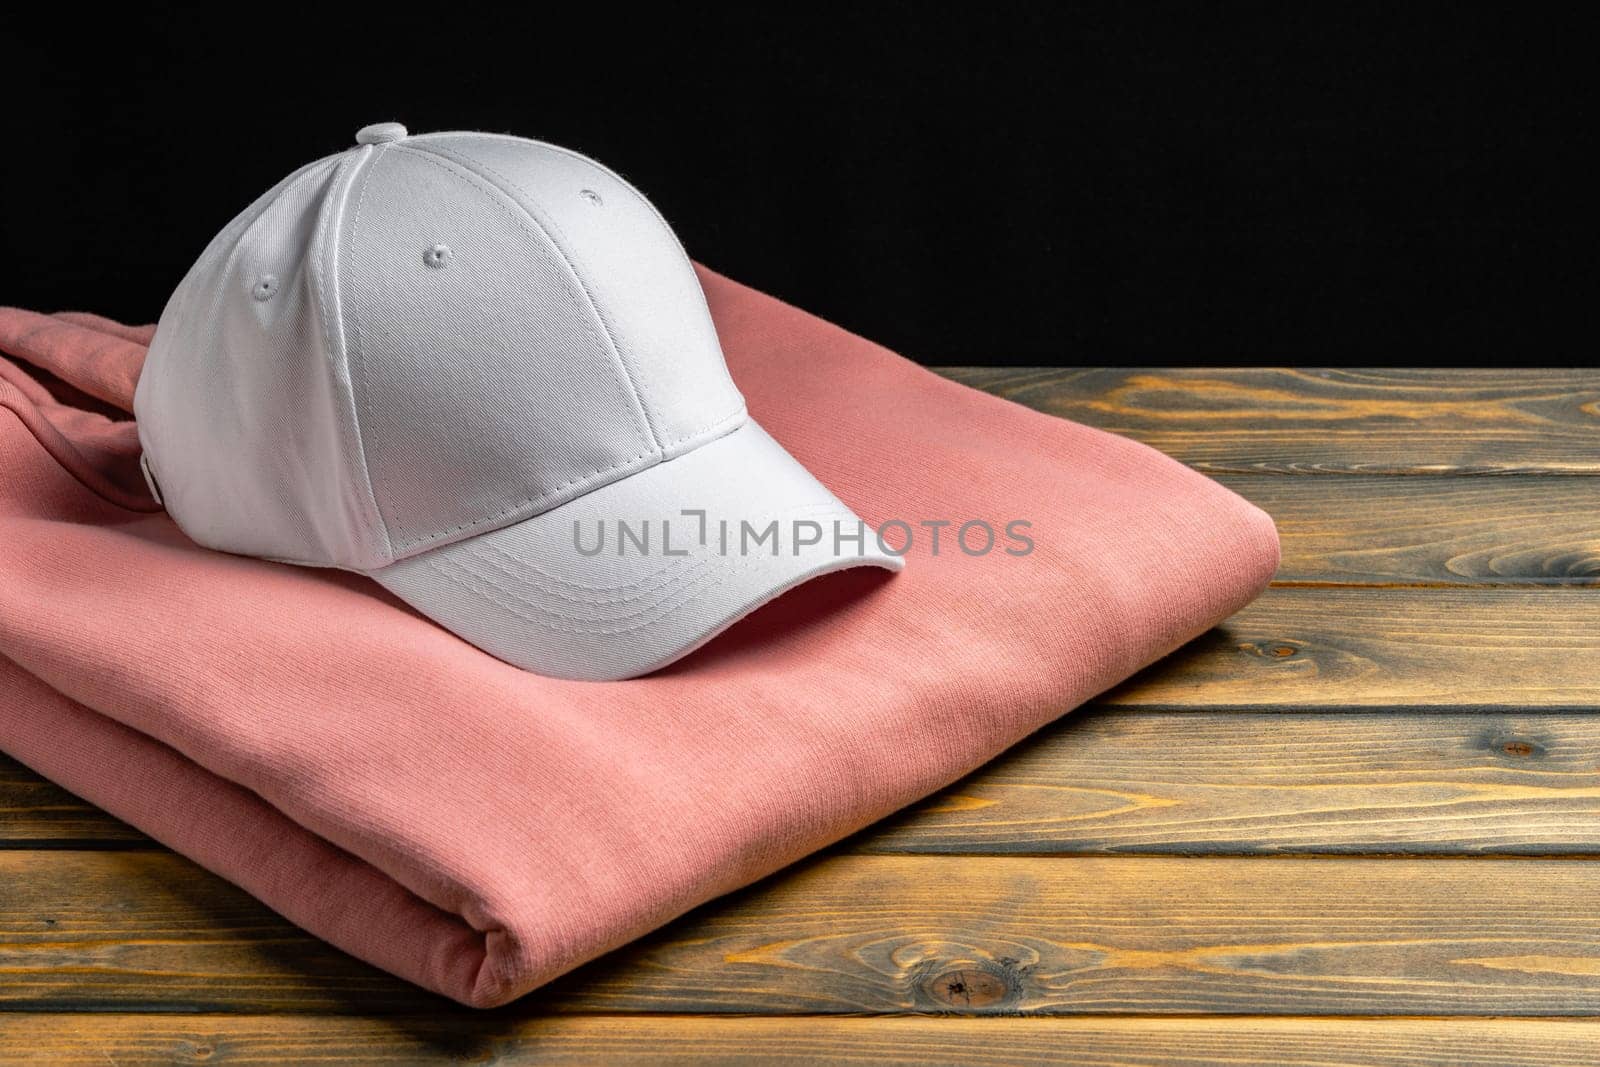 Trainers and baseball cap on wooden background by Fabrikasimf